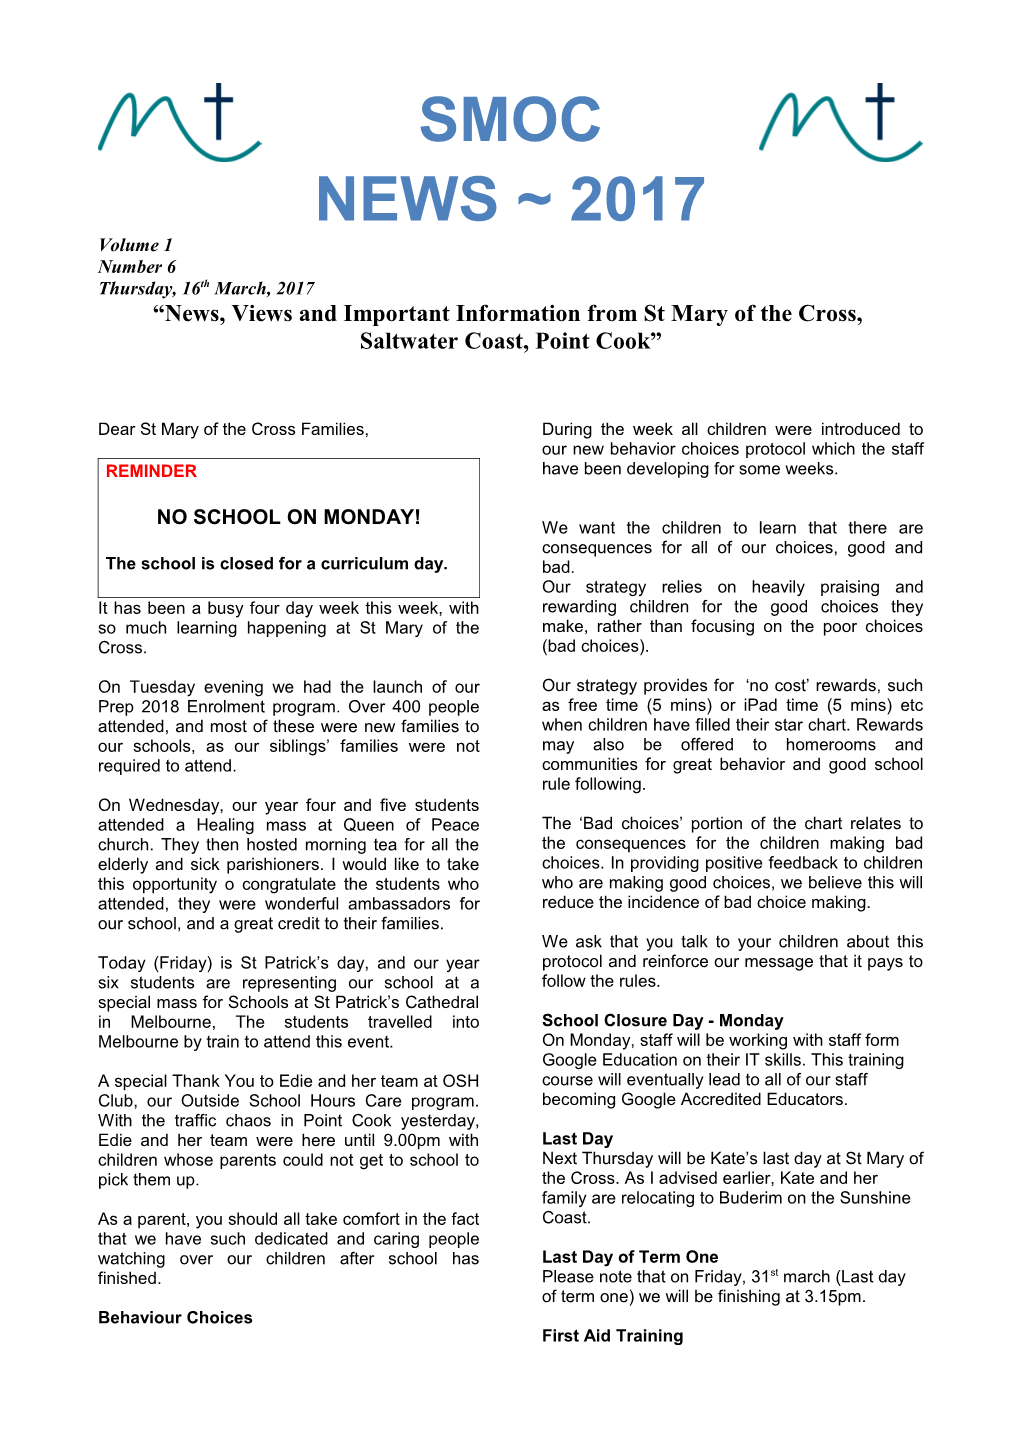 News, Views and Important Information from St Mary of the Cross